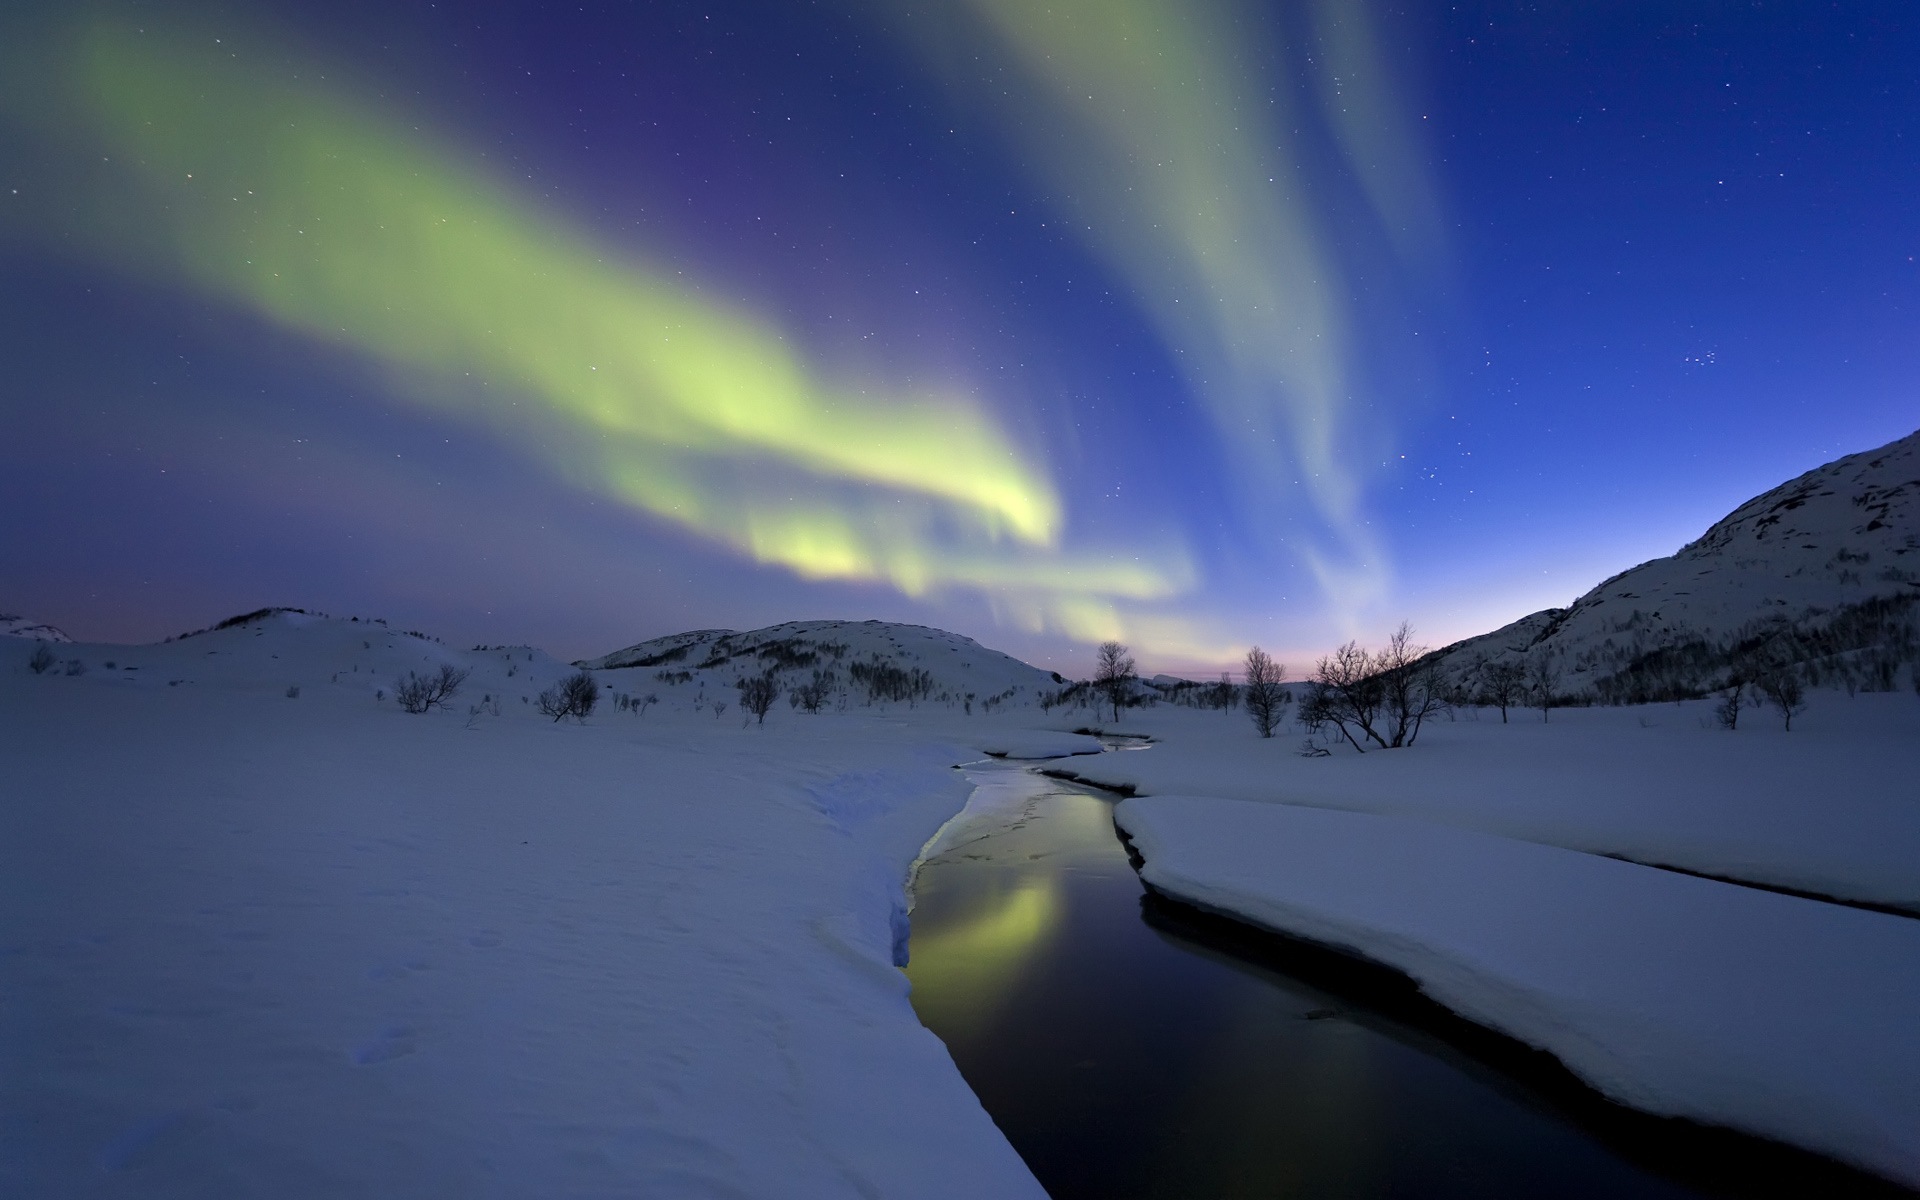 Natural wonders of the Northern Lights HD Wallpaper (2) #19 - 1920x1200